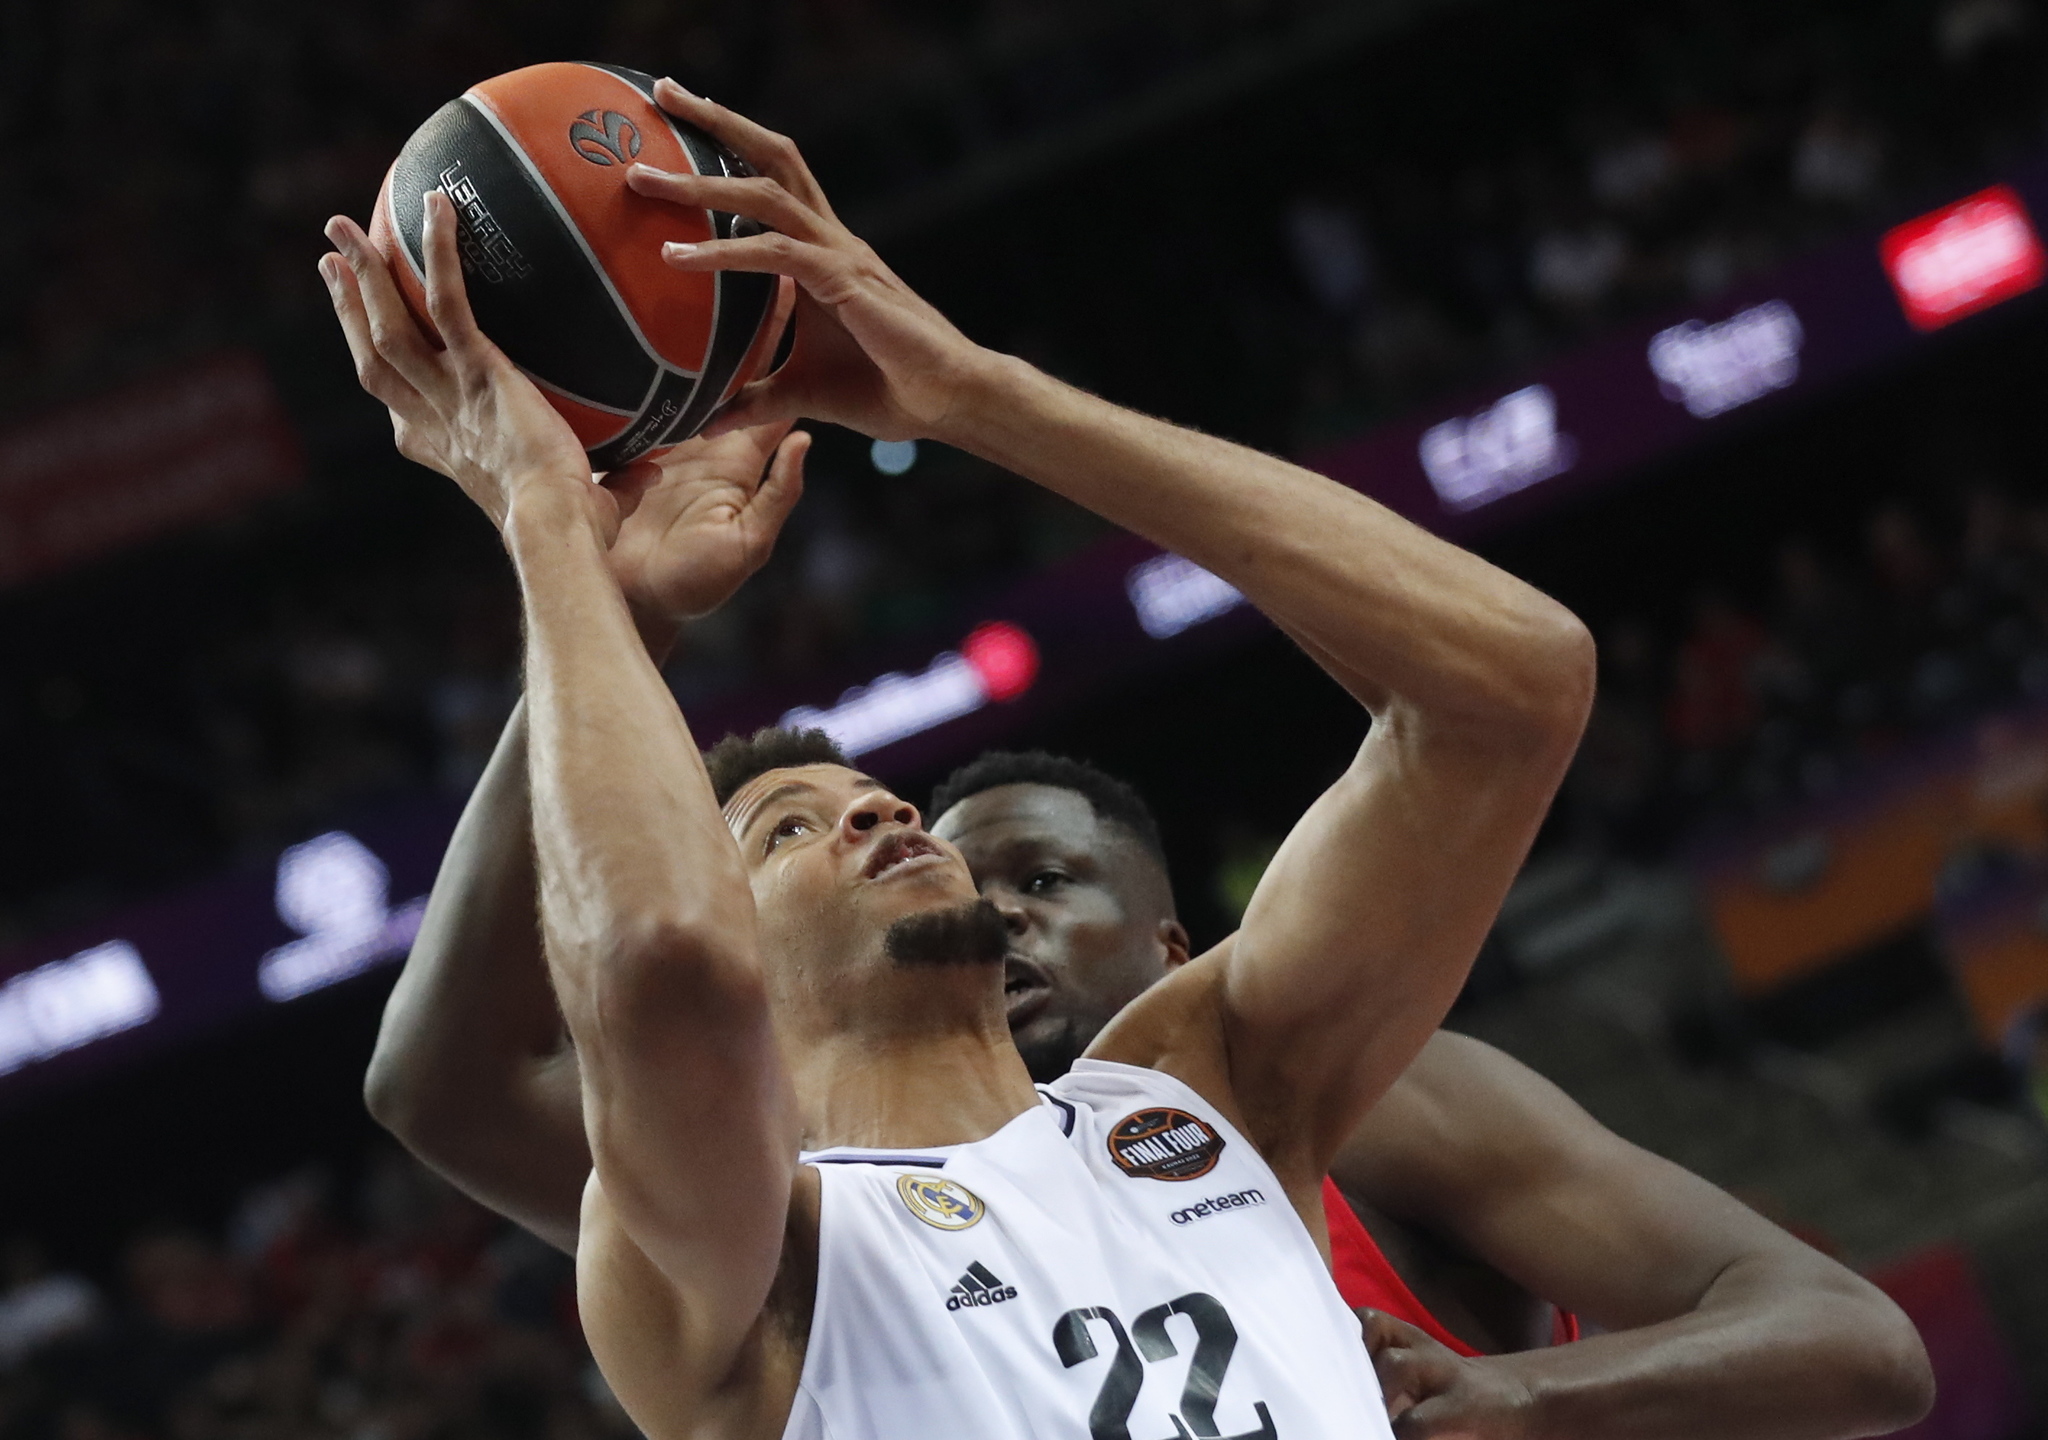  lt;HIT gt;Kaunas lt;/HIT gt; (Lithuania), 21/05/2023.- Olympiacos' Moustapha Fall and Real Madrid's Walter Tavares (L) in action during the Euroleague Basketball final match between Olympiacos Piraeus and Real Madrid in  lt;HIT gt;Kaunas lt;/HIT gt;, Lithuania, 21 May 2023. (Baloncesto, Euroliga, Lituania, Pireo) EFE/EPA/TOMS KALNINS